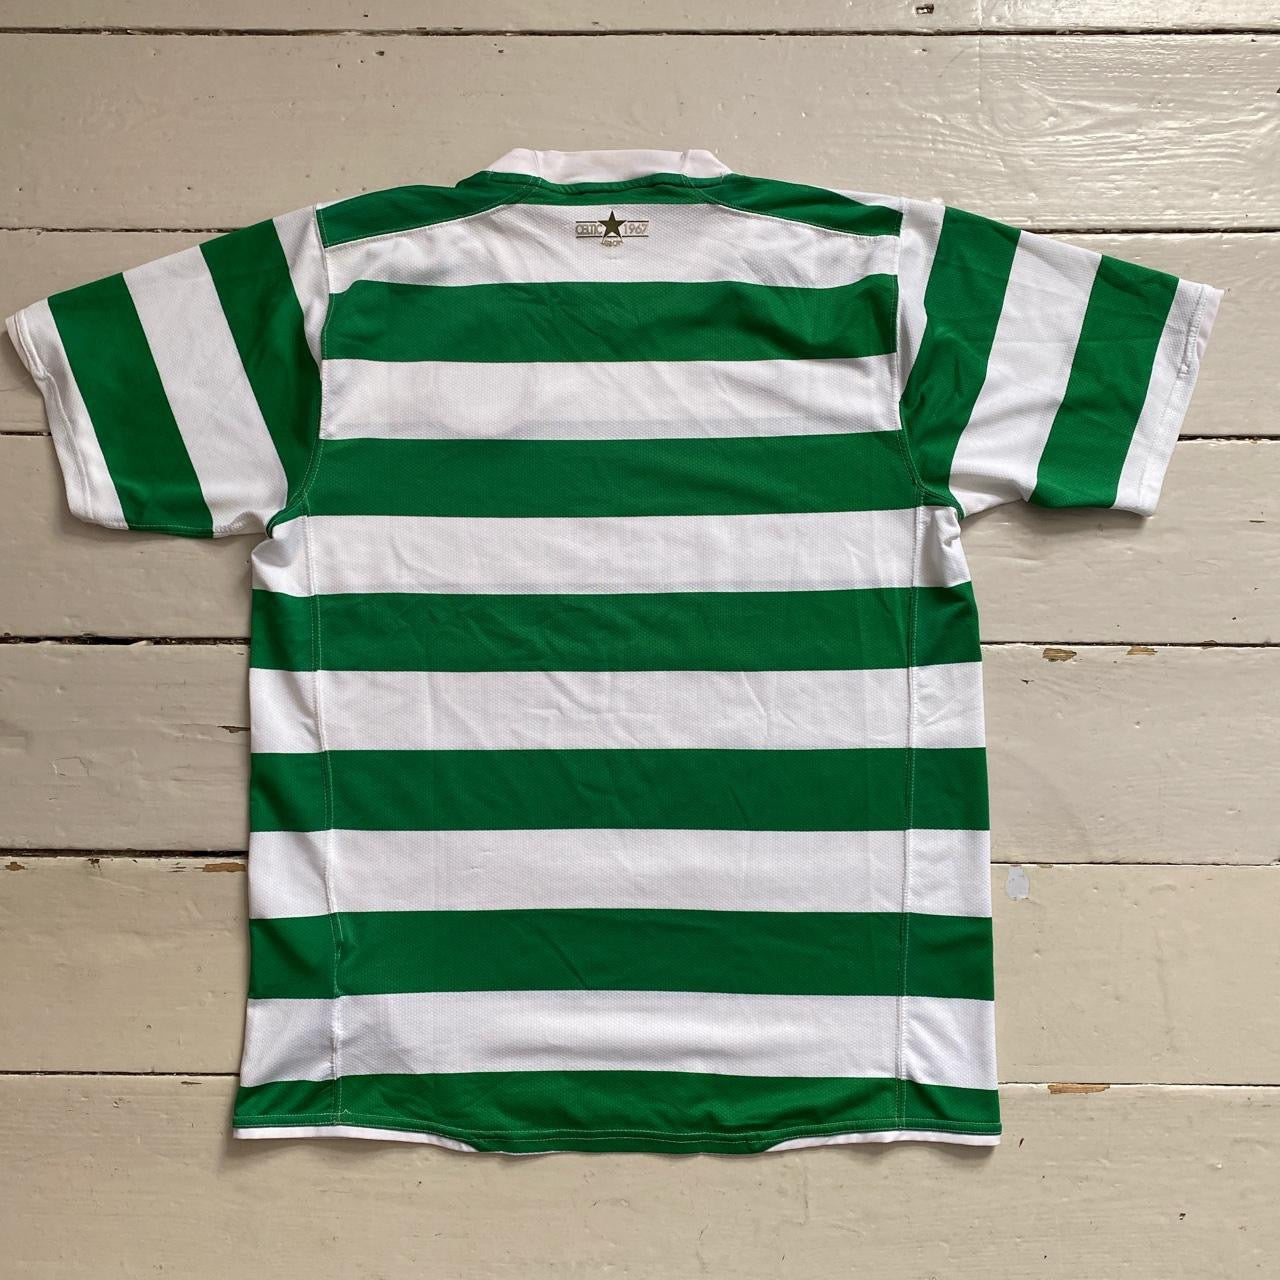 Nike Celtic Football Jersey and Shorts (Large)